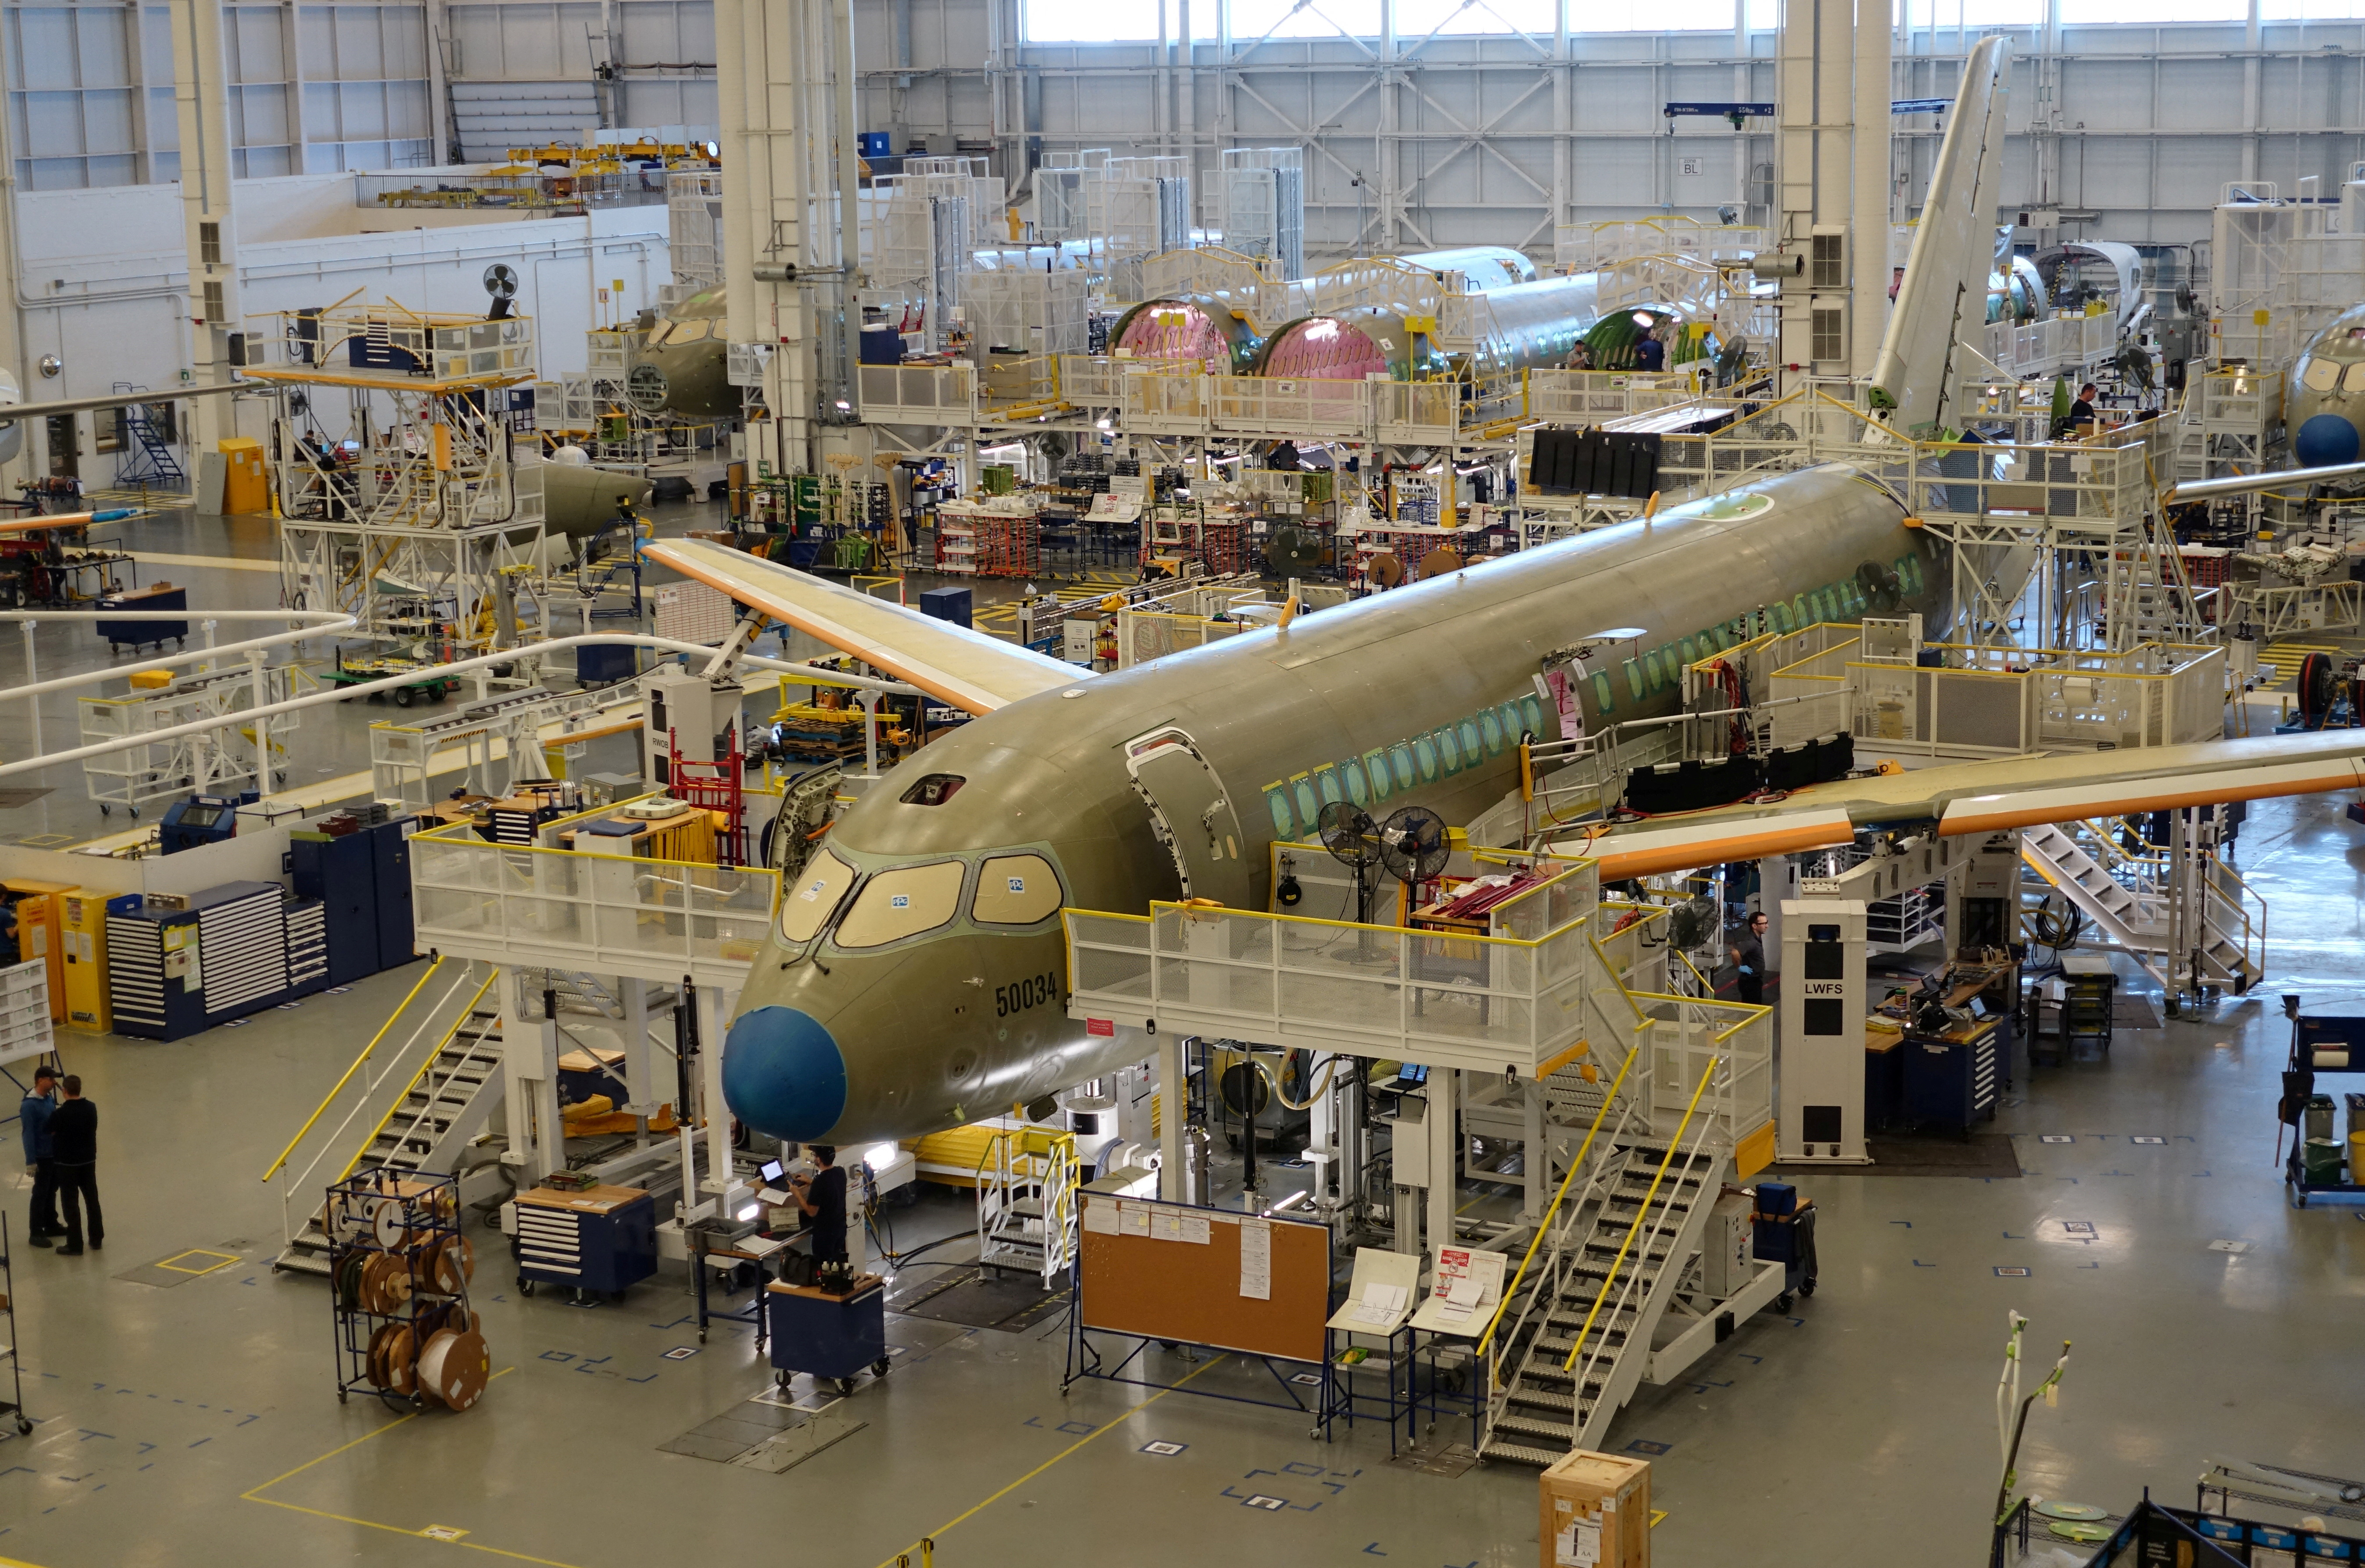 An Airbus A220 passenger jet stands in the final assembly line, where the European company plans a $30 million investment to keep up with forecast demand